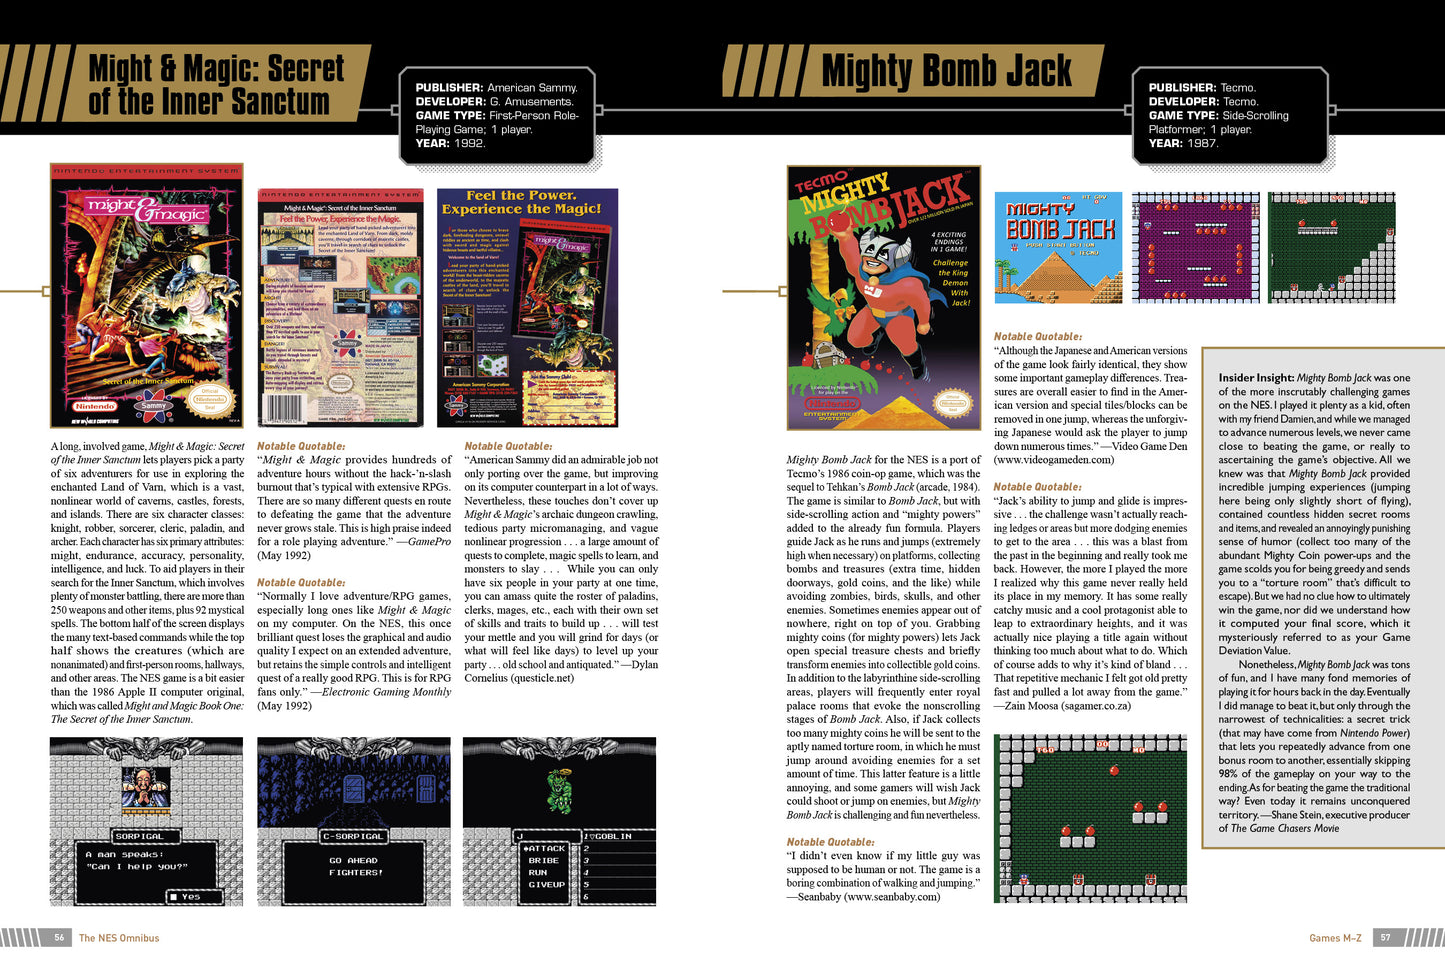 The NES Omnibus: The Nintendo Entertainment System & Its Games, Vol. 2 (M-Z)